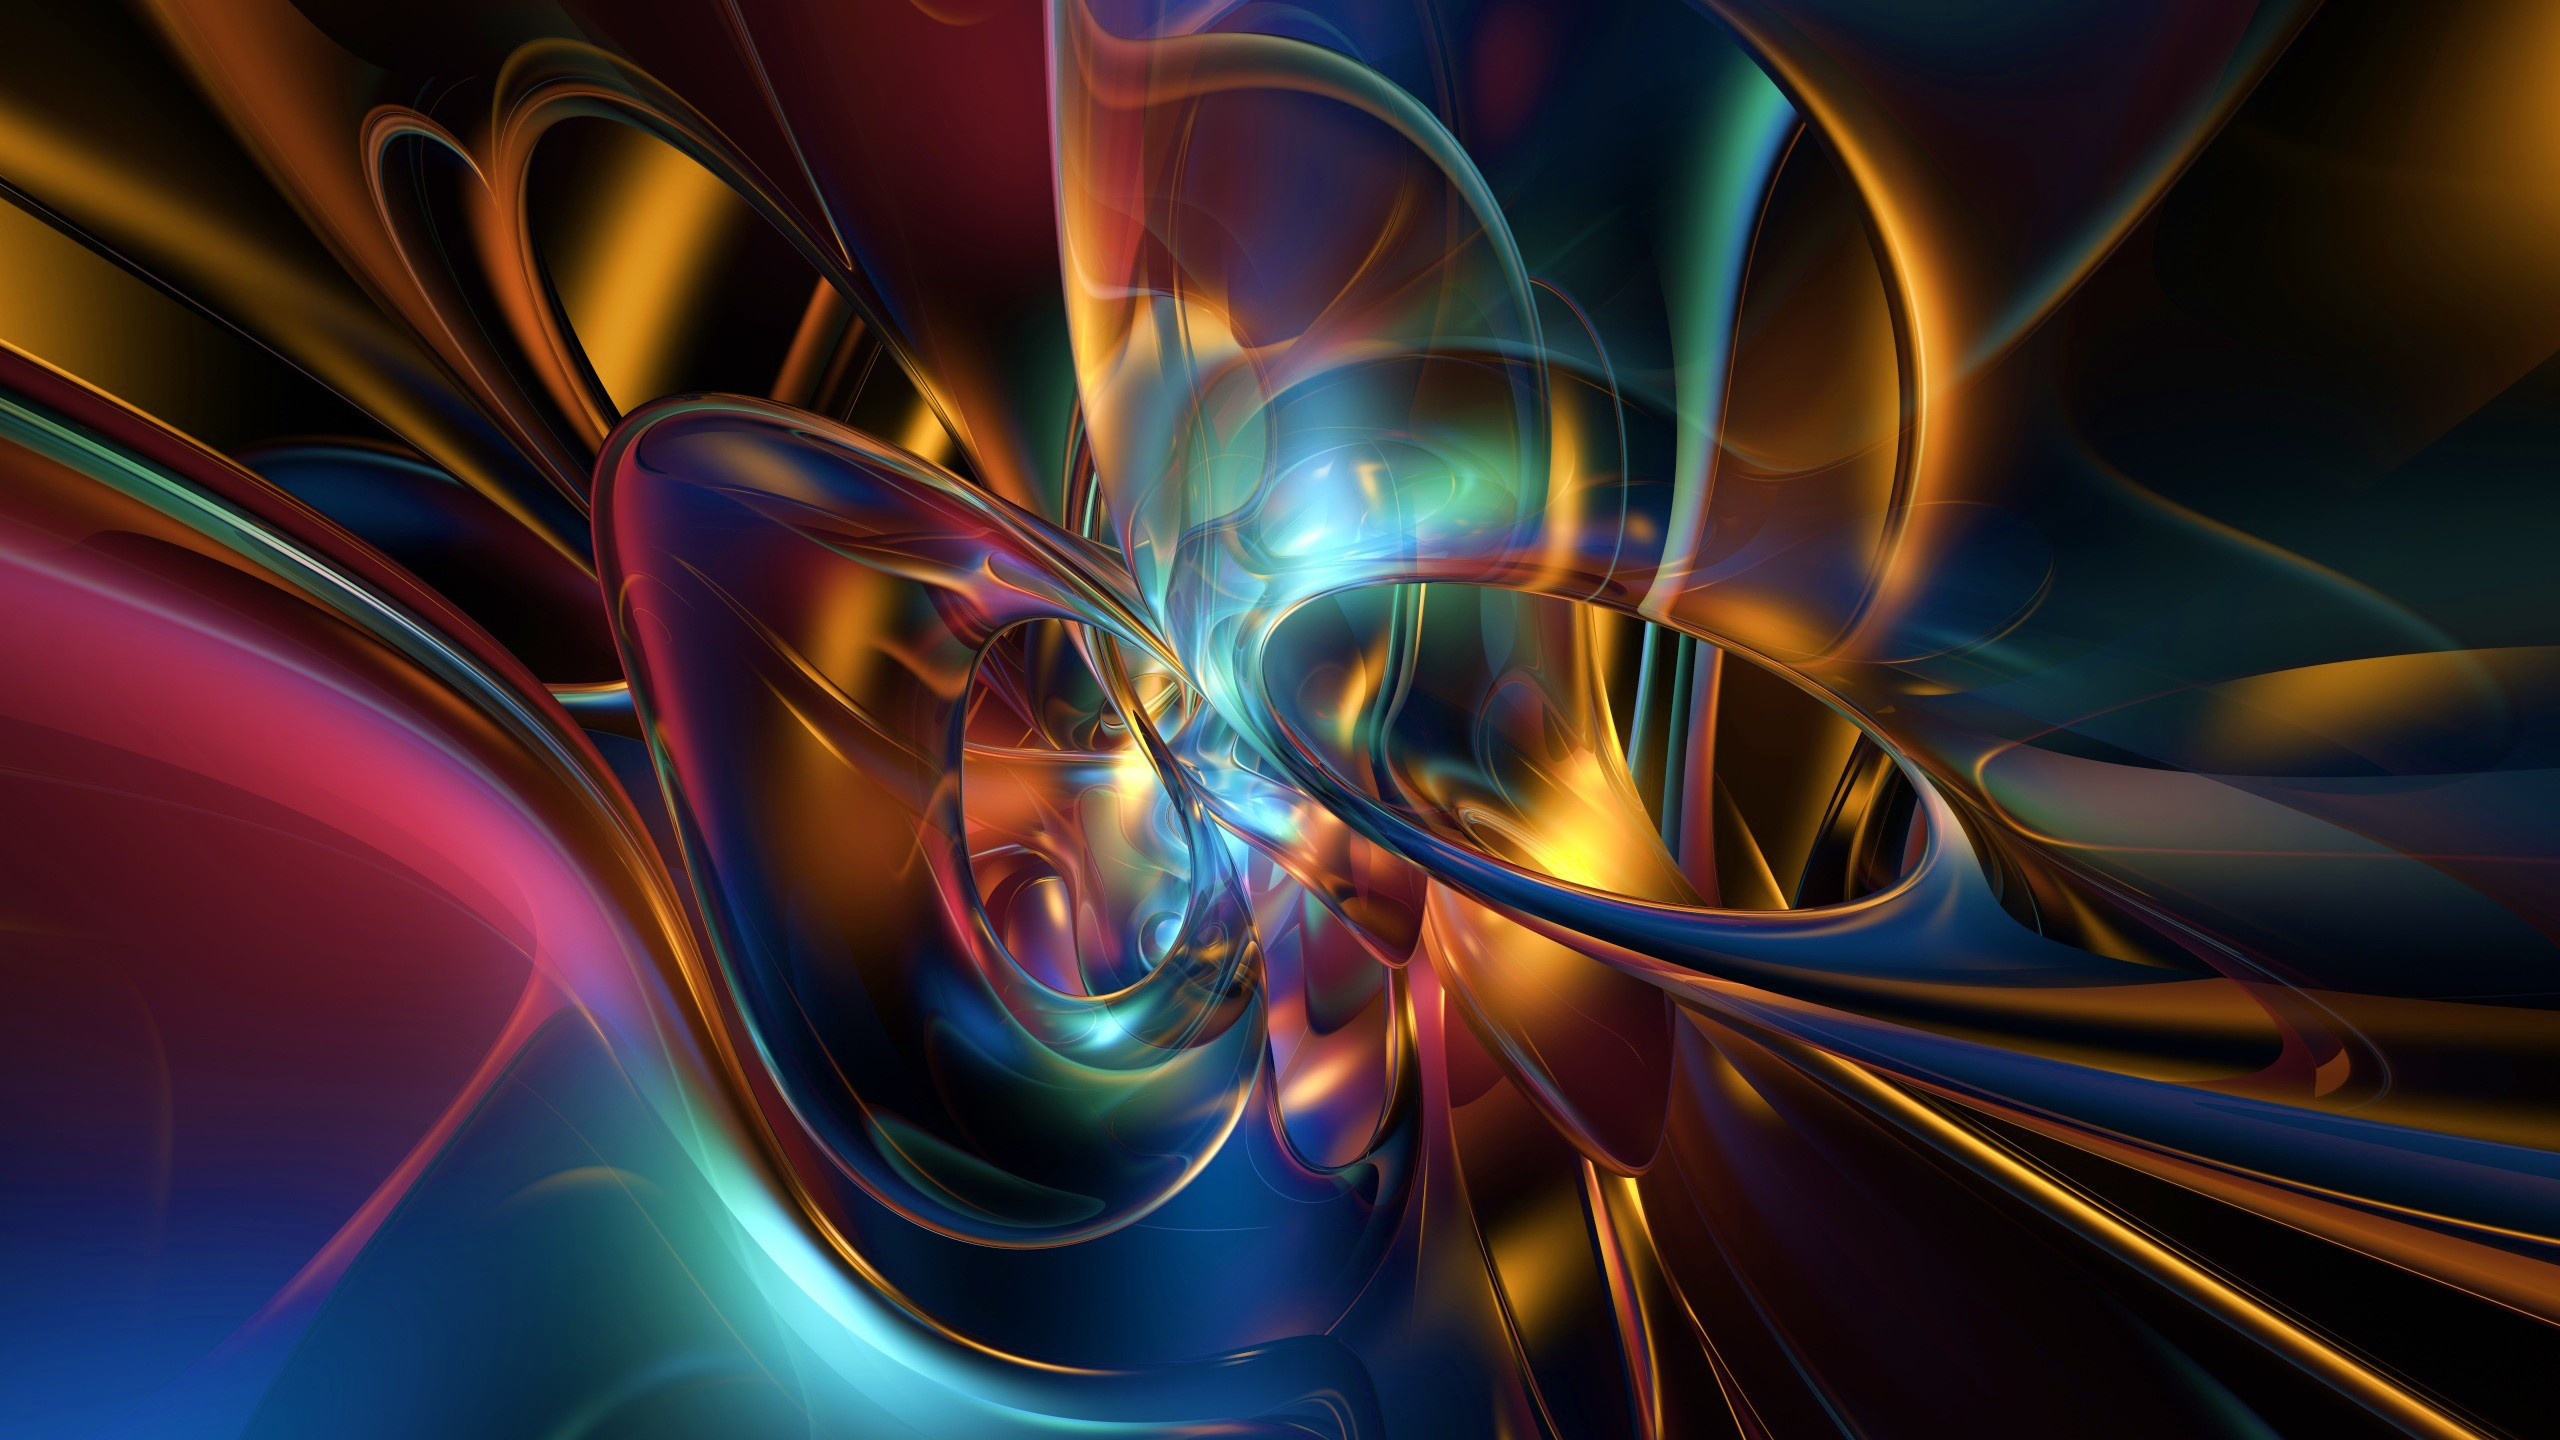 Blue and Purple Abstract Painting. Wallpaper in 2560x1440 Resolution